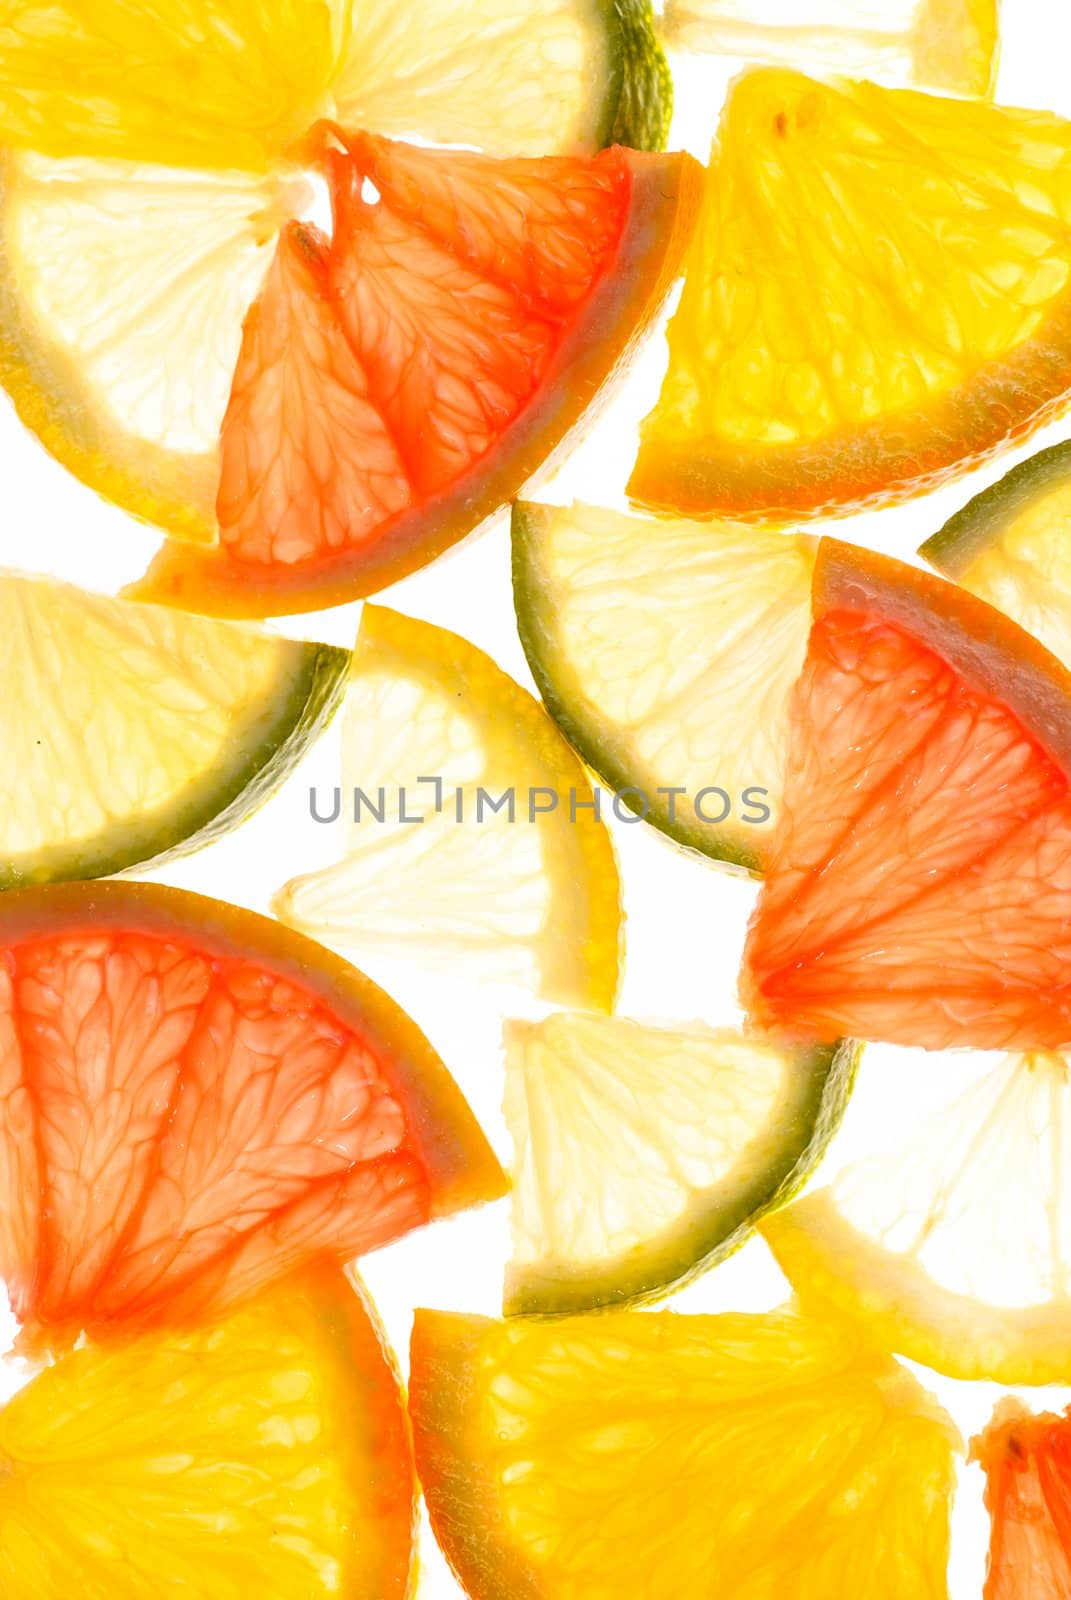 Slices of grapefruit, lemon, lime and orange as a background